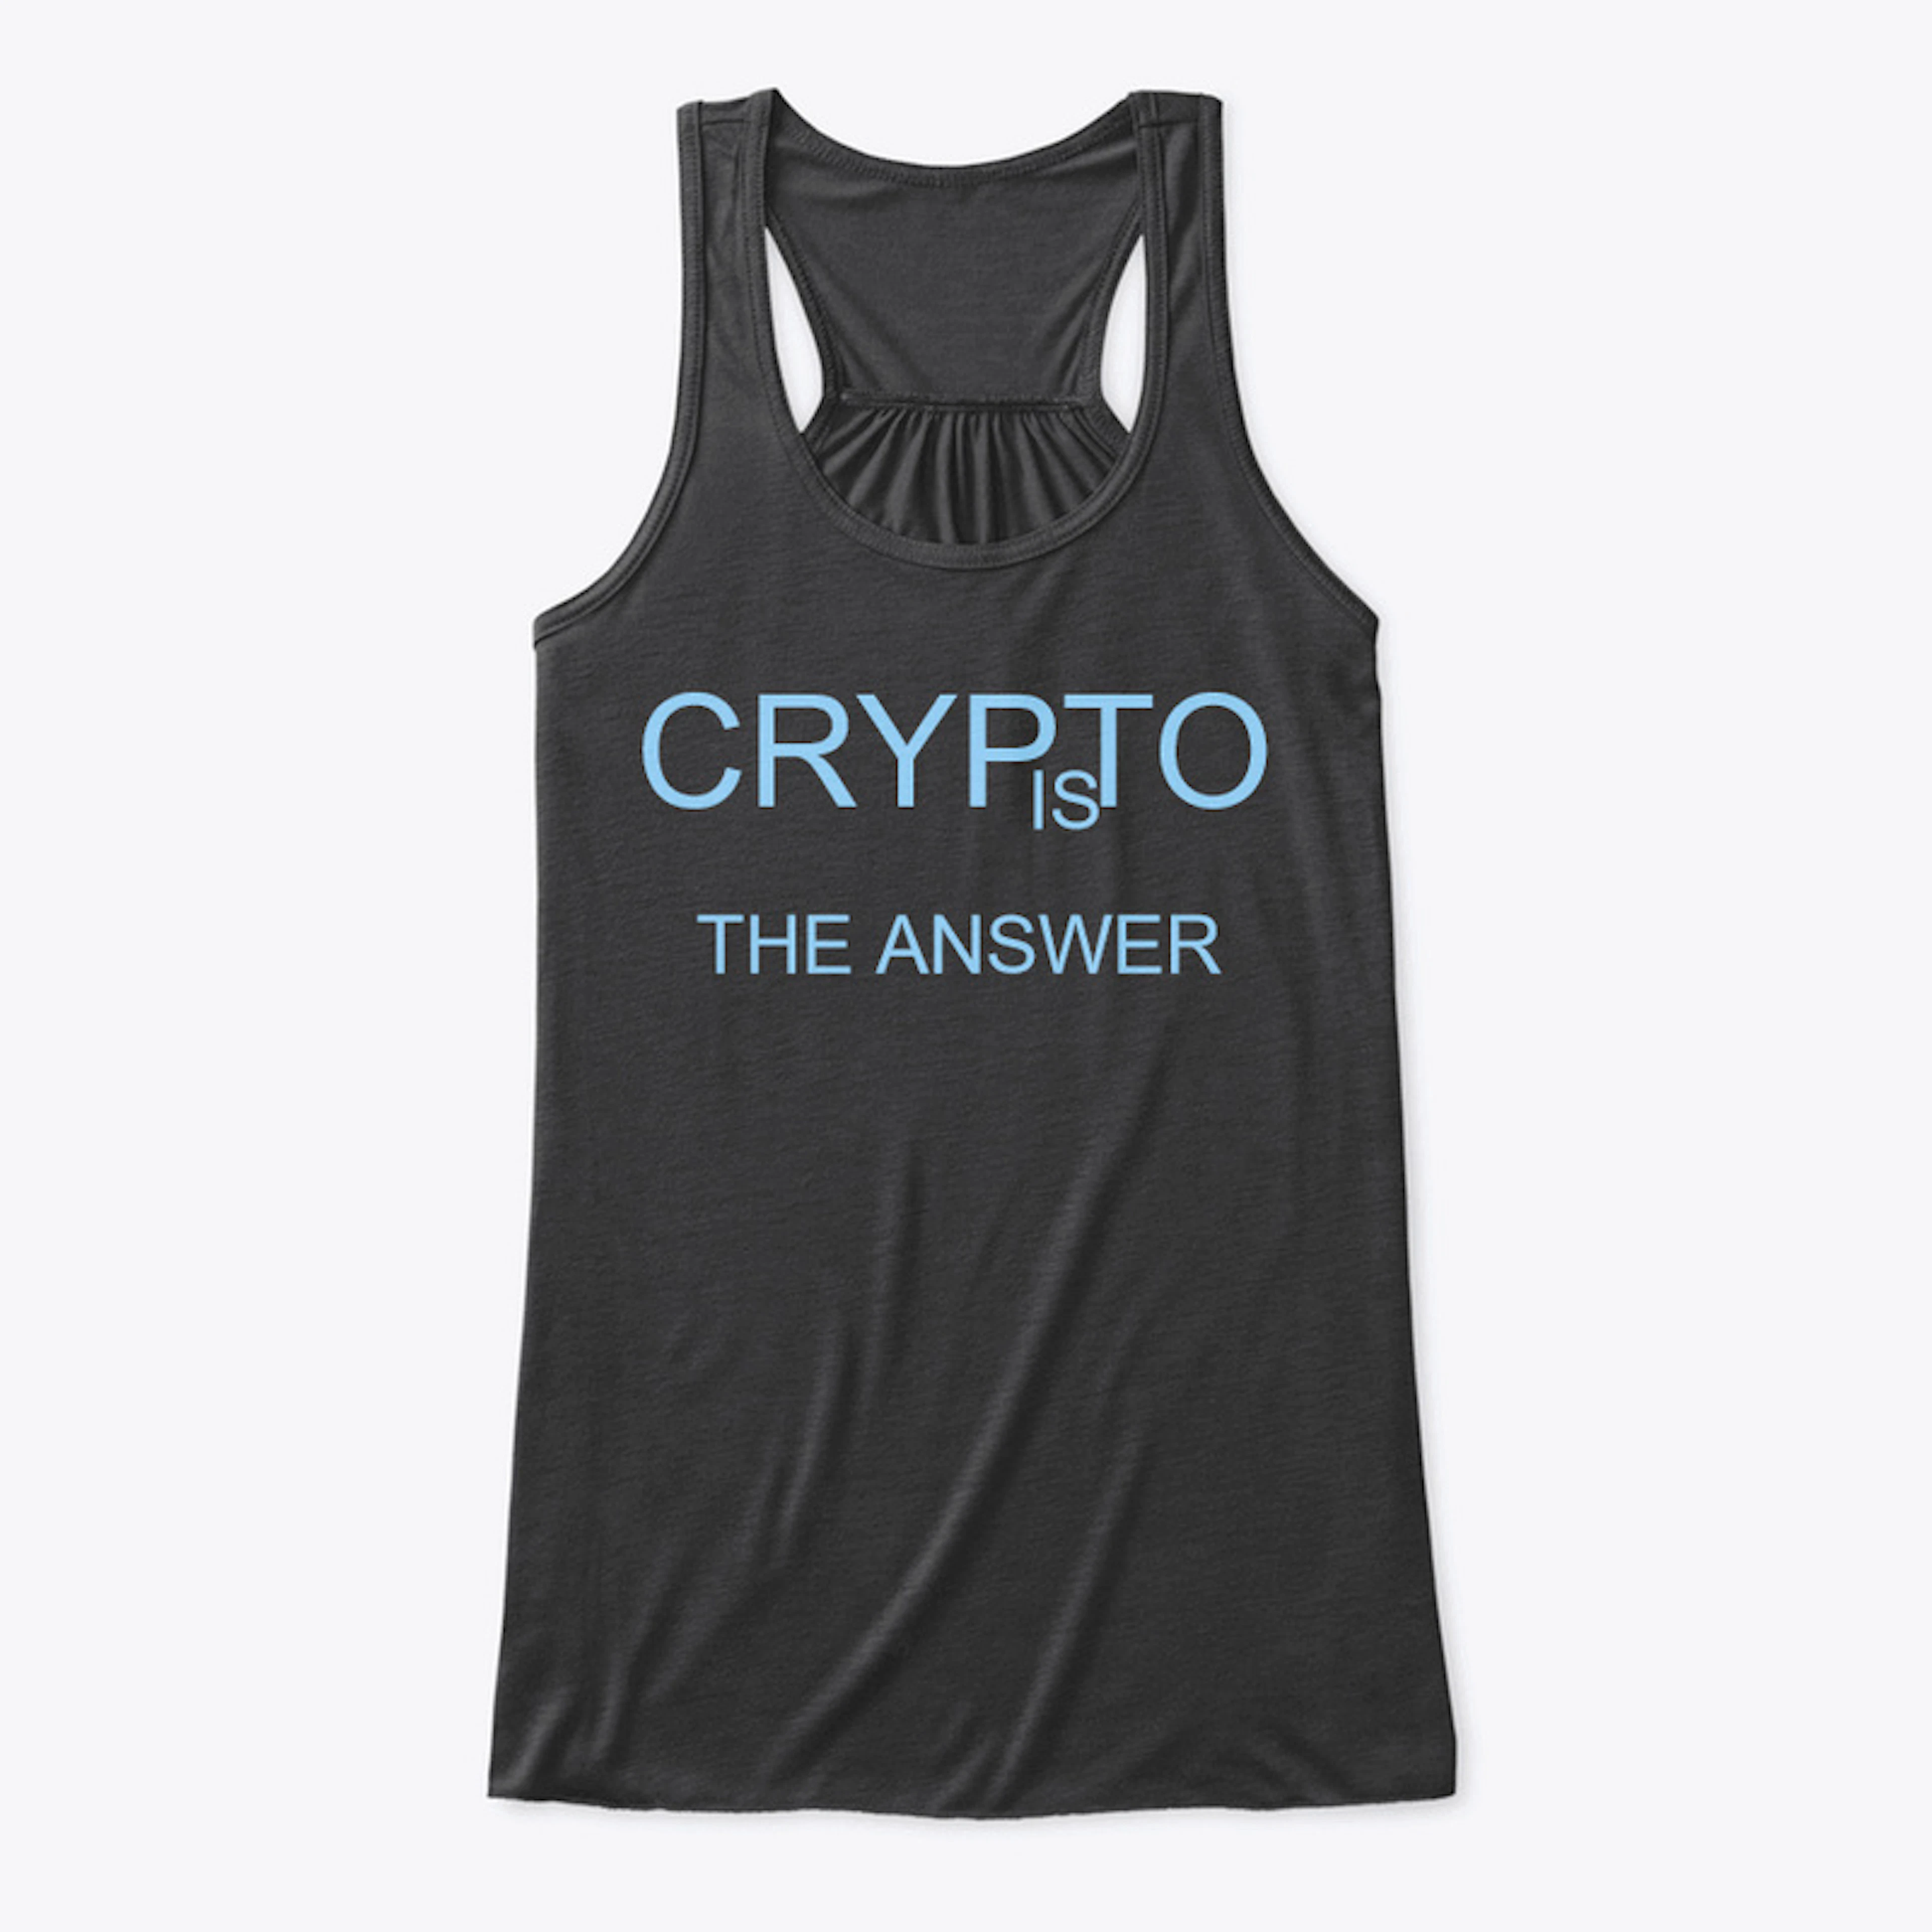 Crypto is the answer